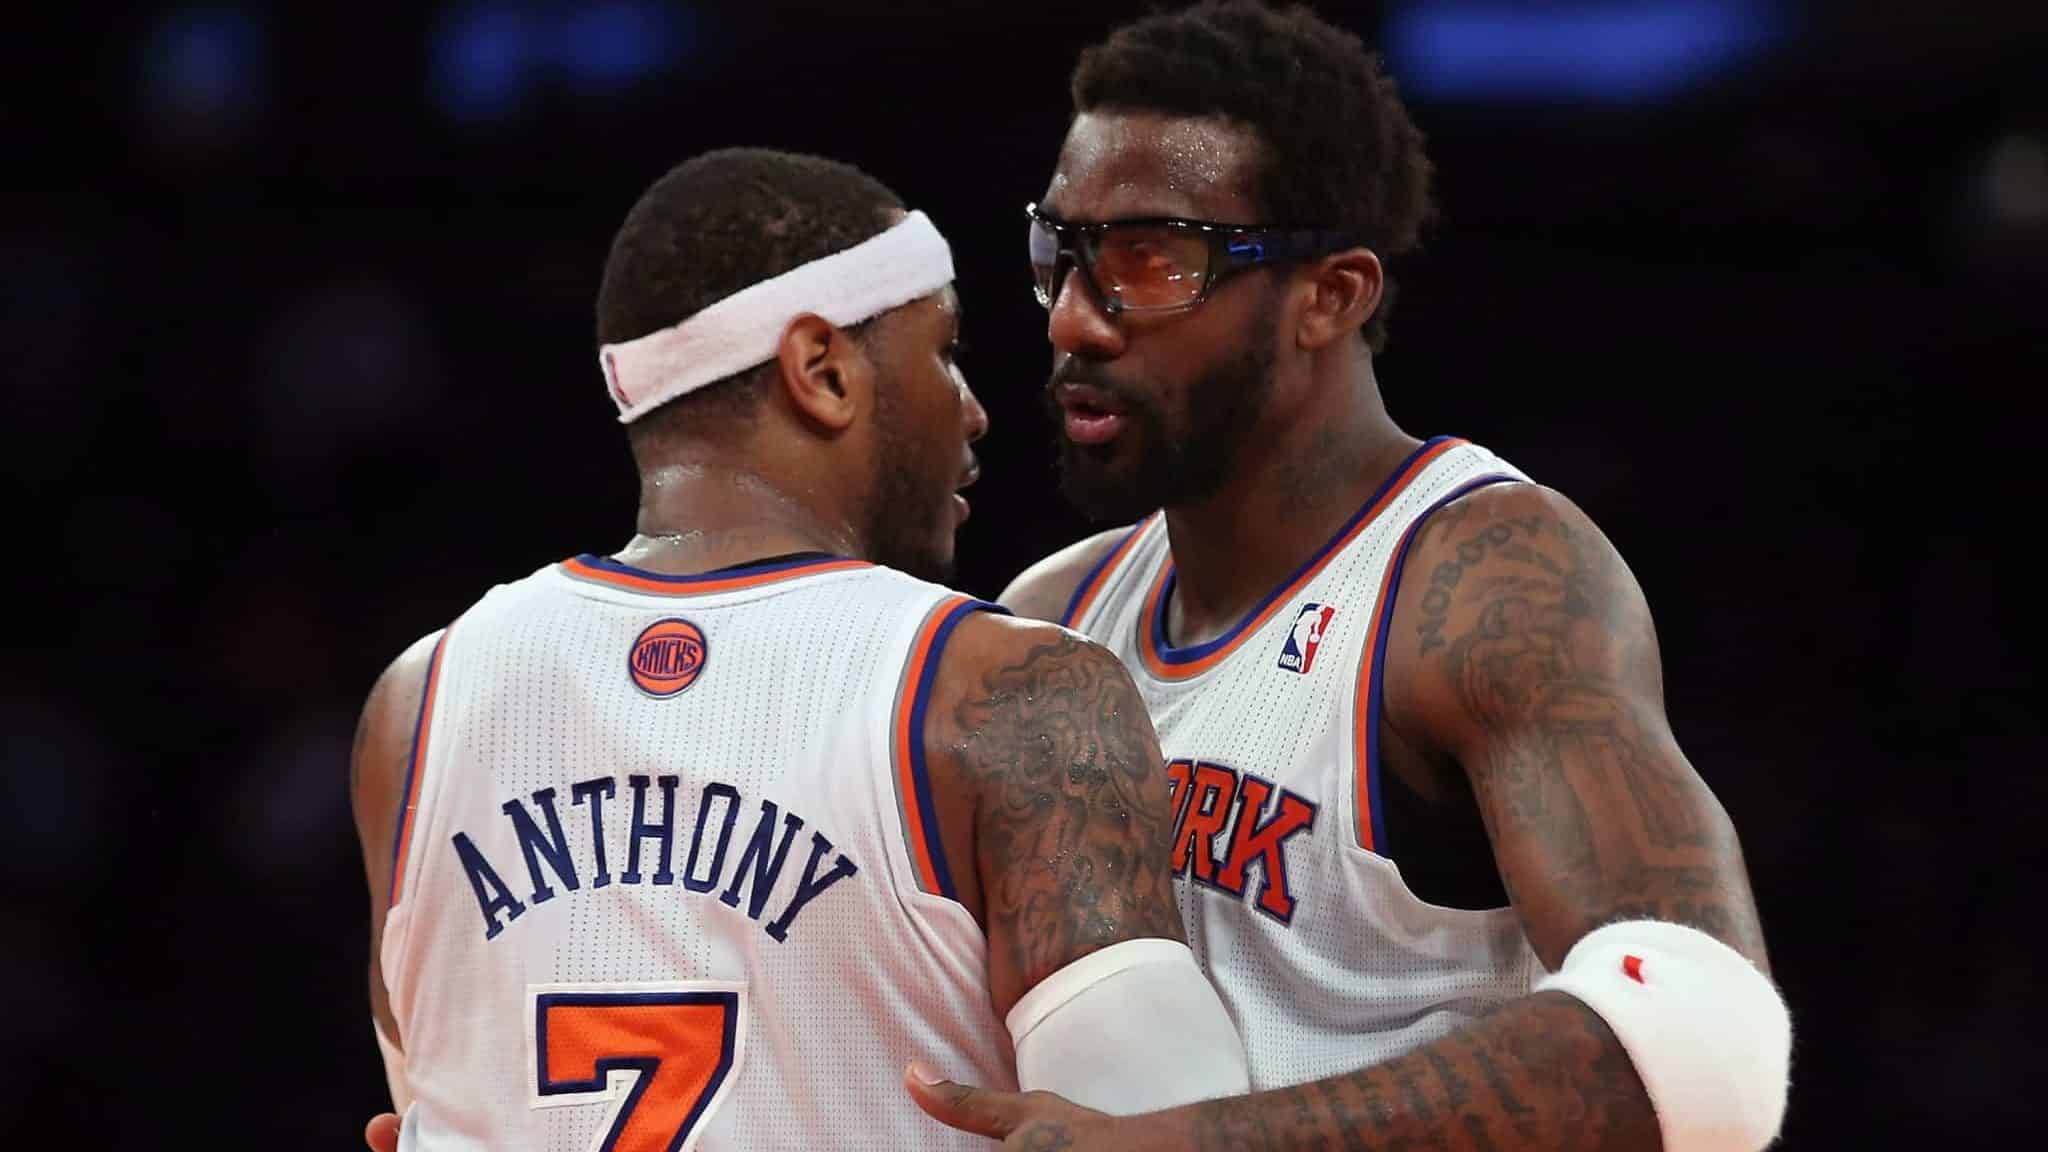 NEW YORK, NY - DECEMBER 11: Amar'e Stoudemire #1 and Carmelo Anthony #7 of the New York Knicks embrance following their victory over the Chicago Bulls at Madison Square Garden on December 11, 2013 in New York City. The Knicks defeated the Bulls 83-78.